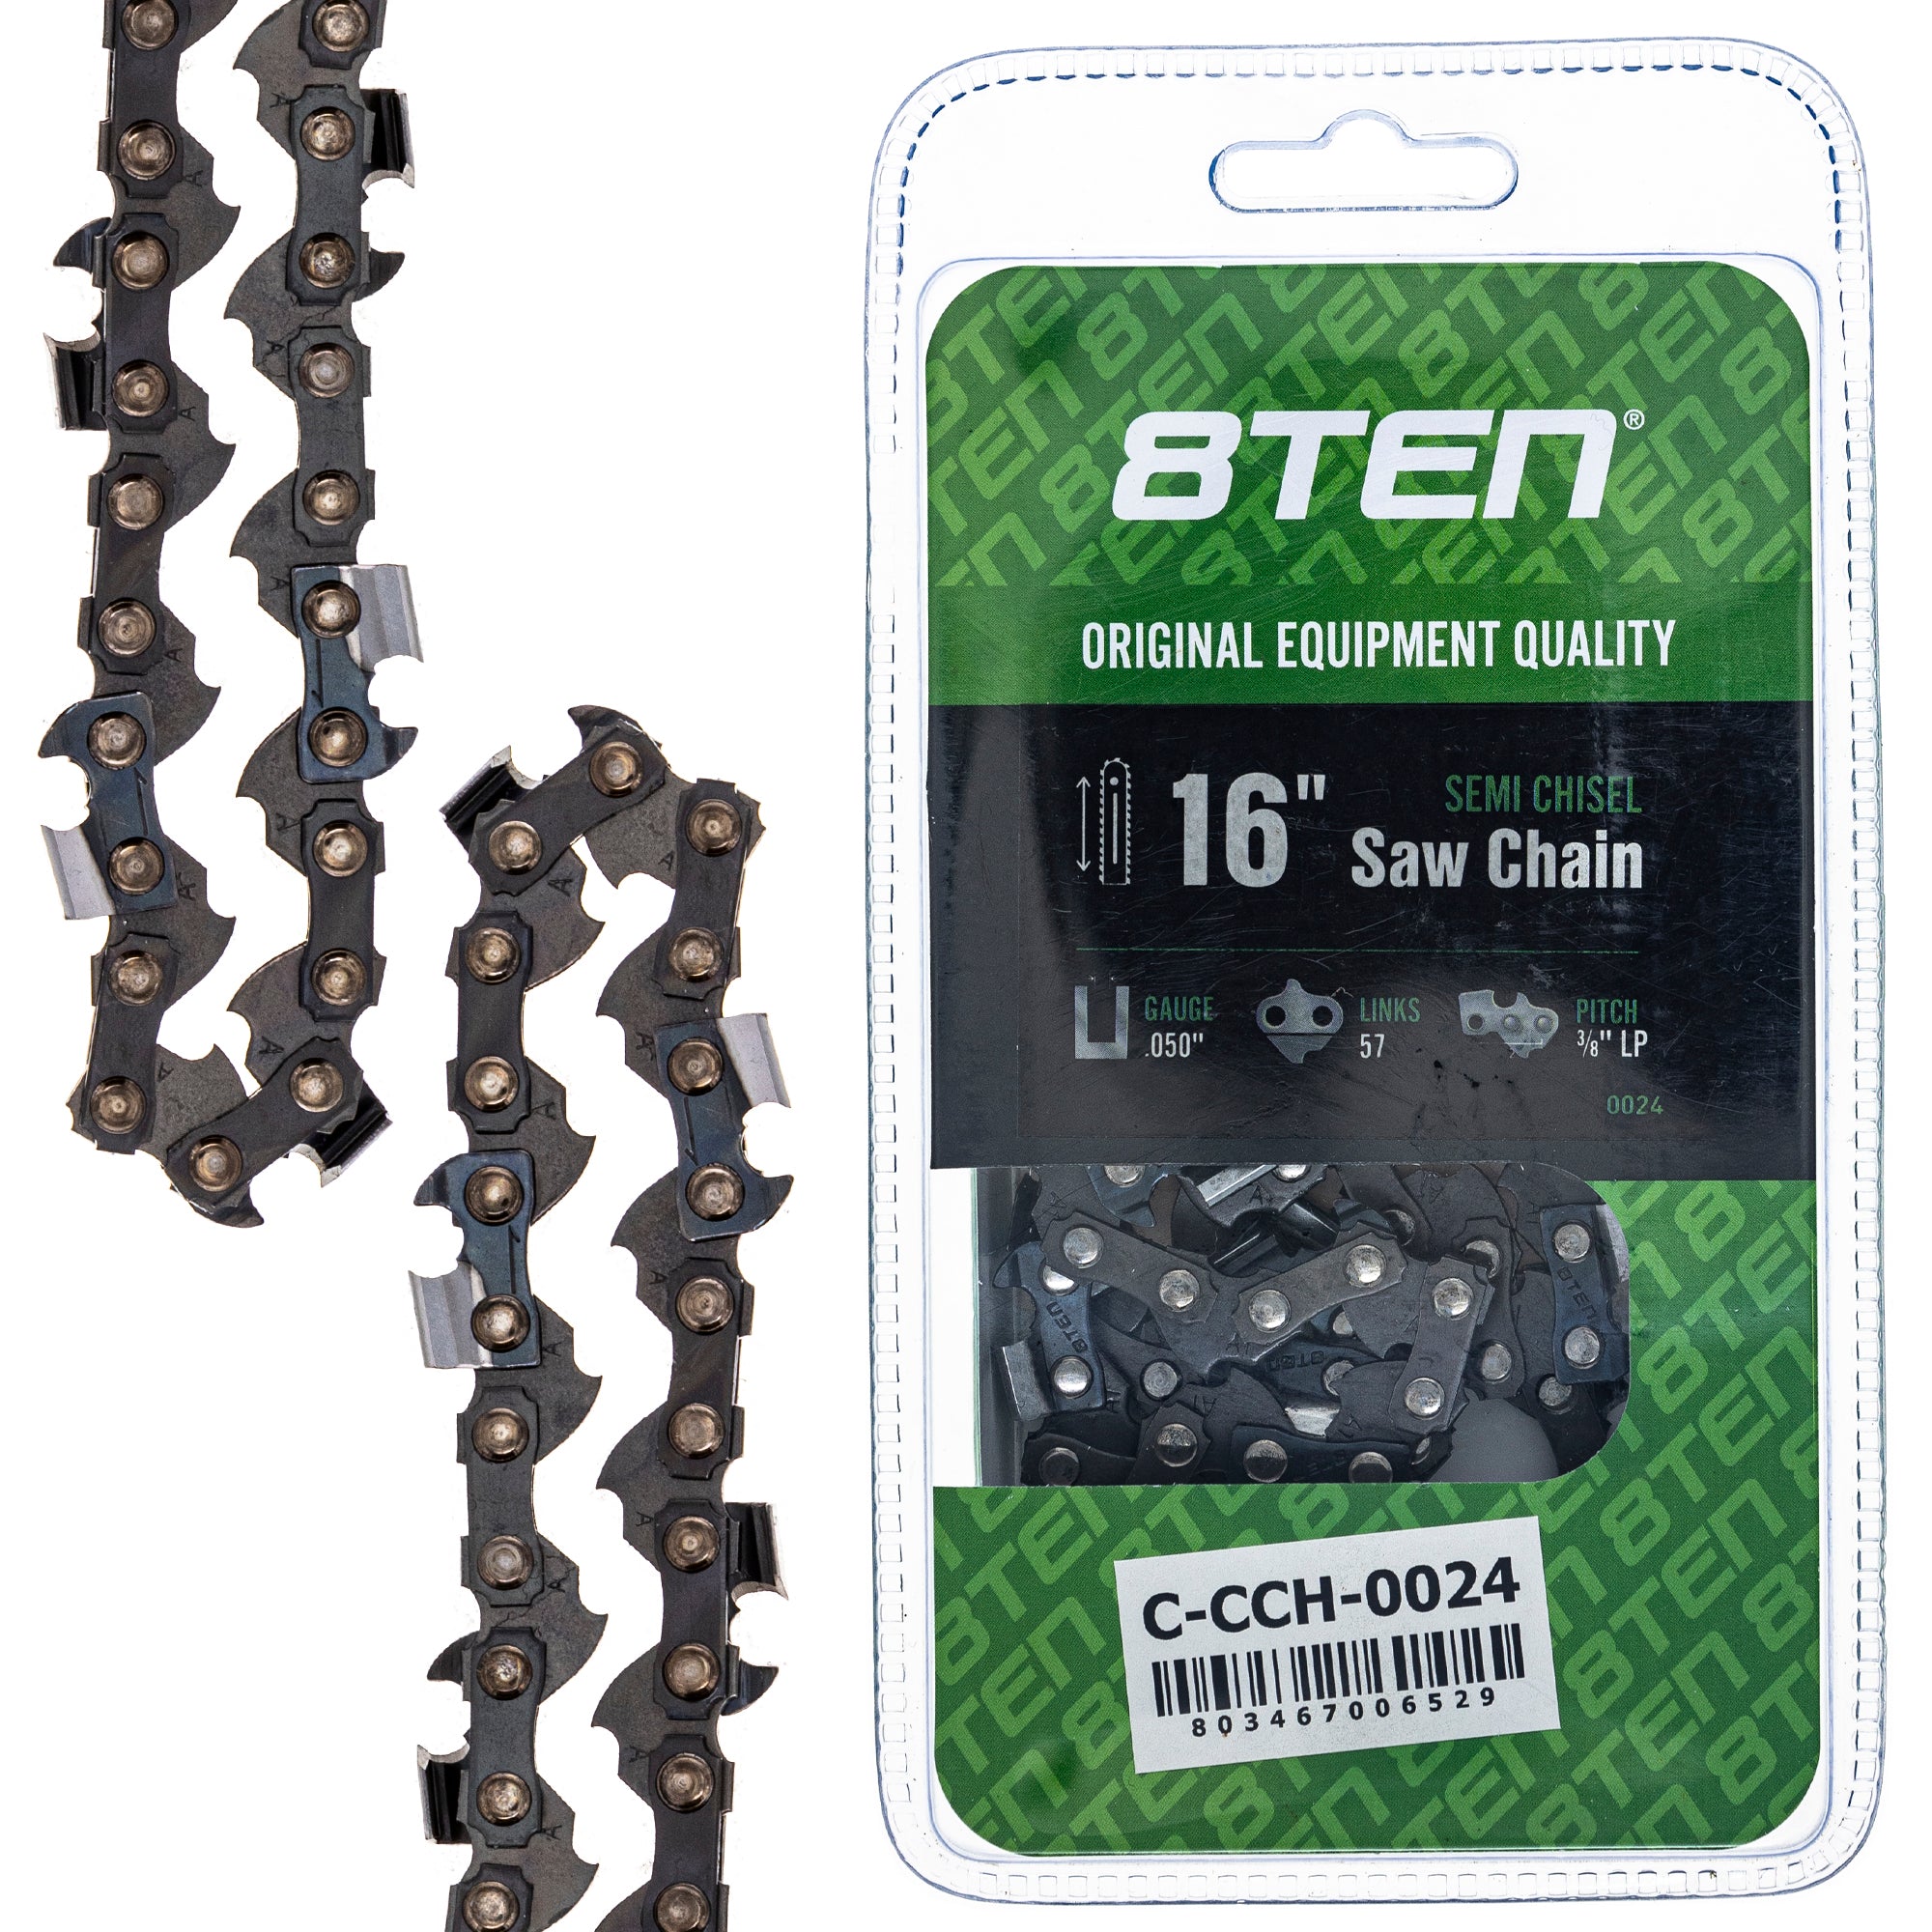 8TEN 810-CCC2246H Chain 5-Pack for zOTHER Windsor Stens Oregon GB